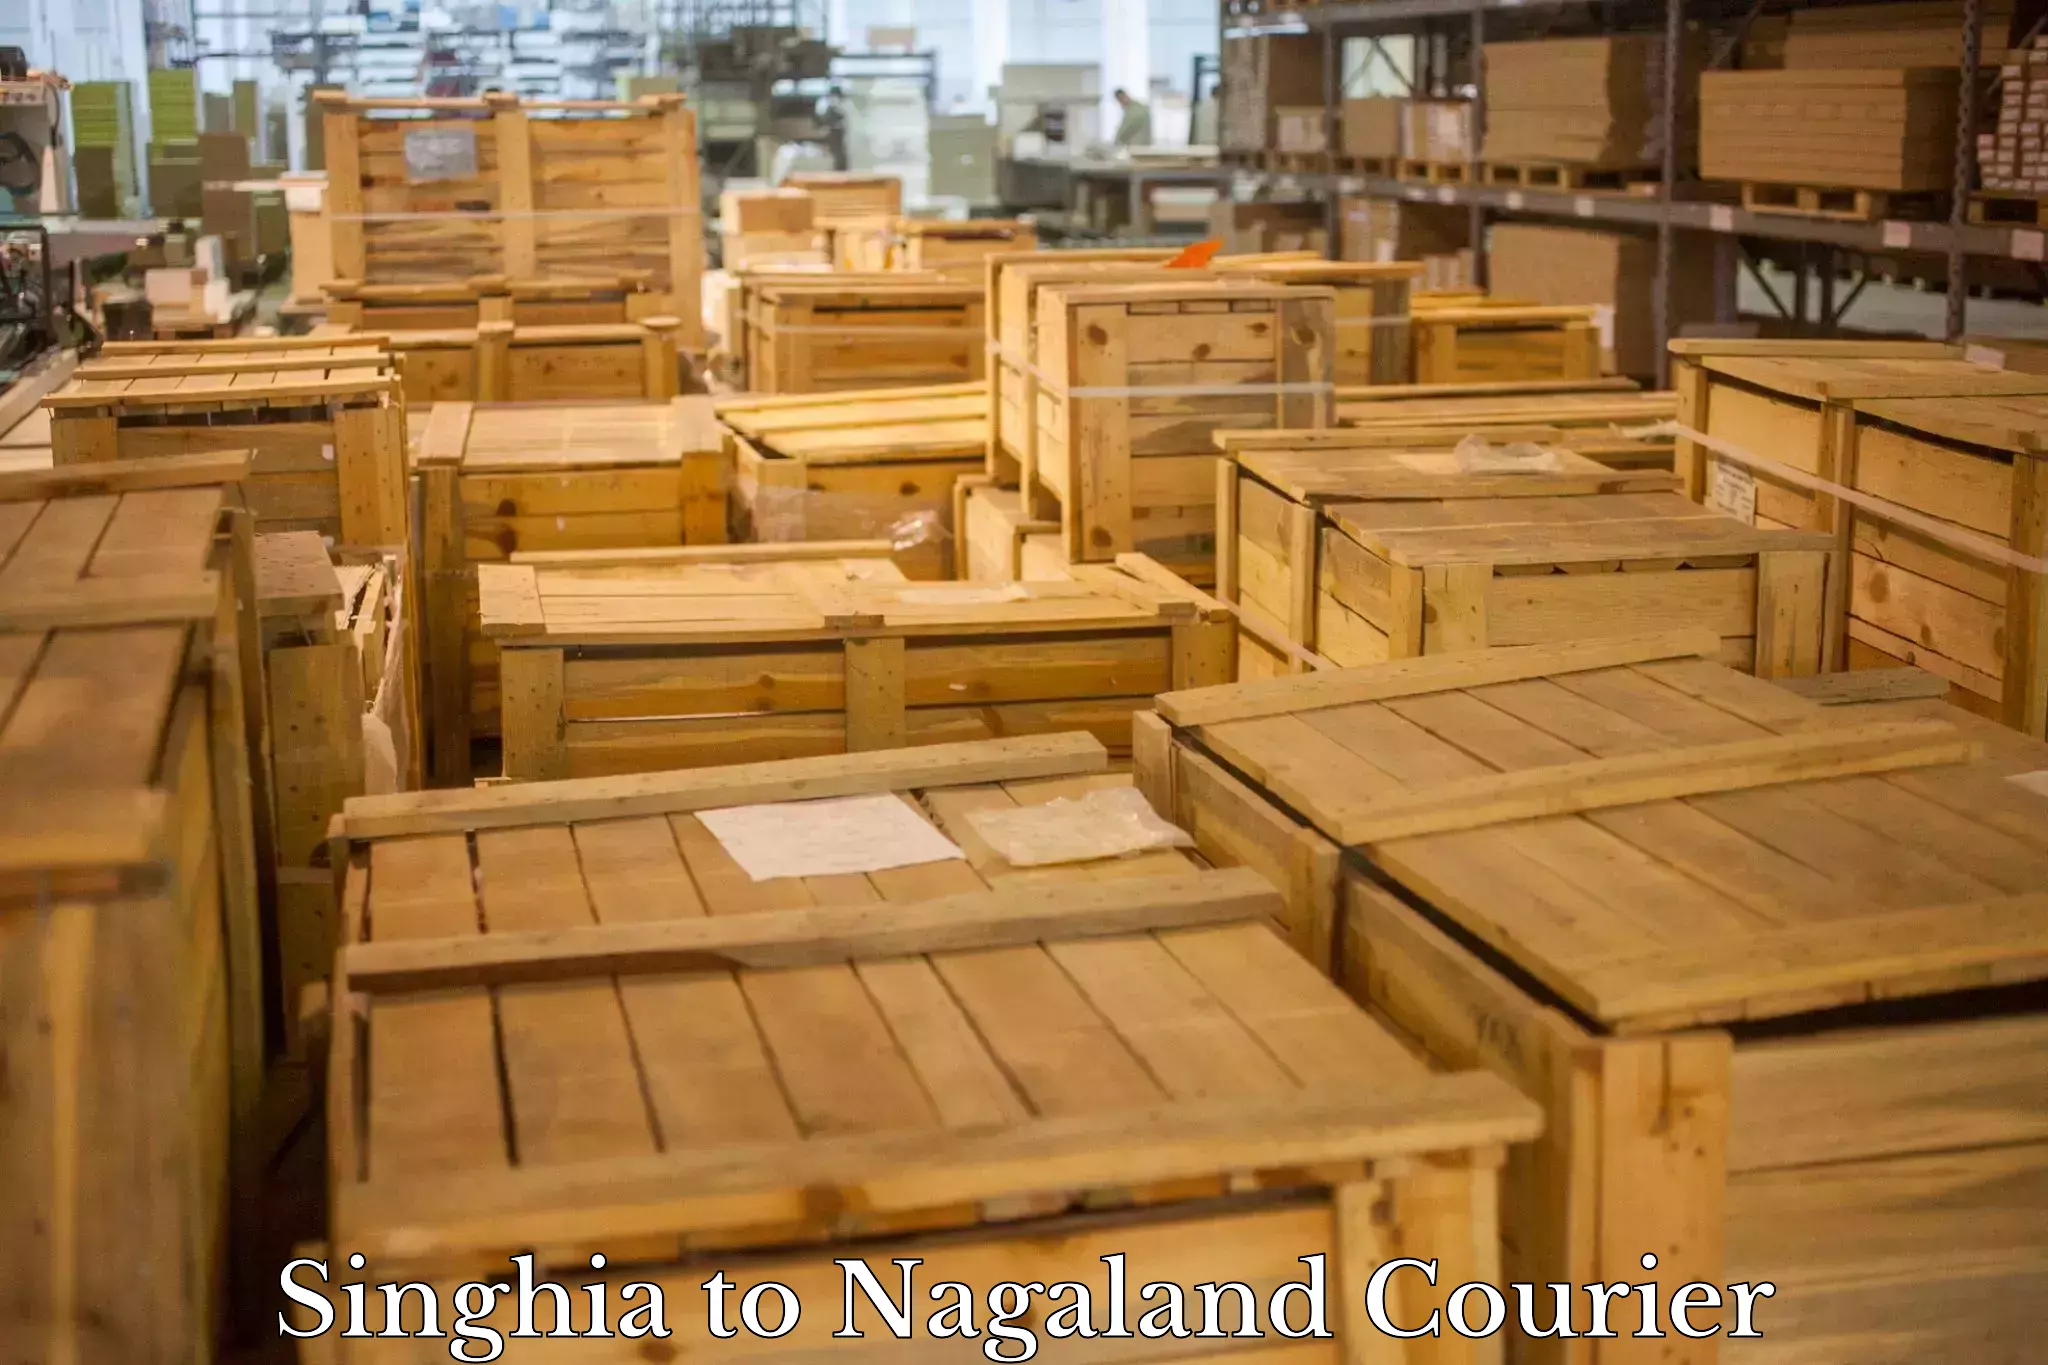 Seamless shipping experience in Singhia to NIT Nagaland